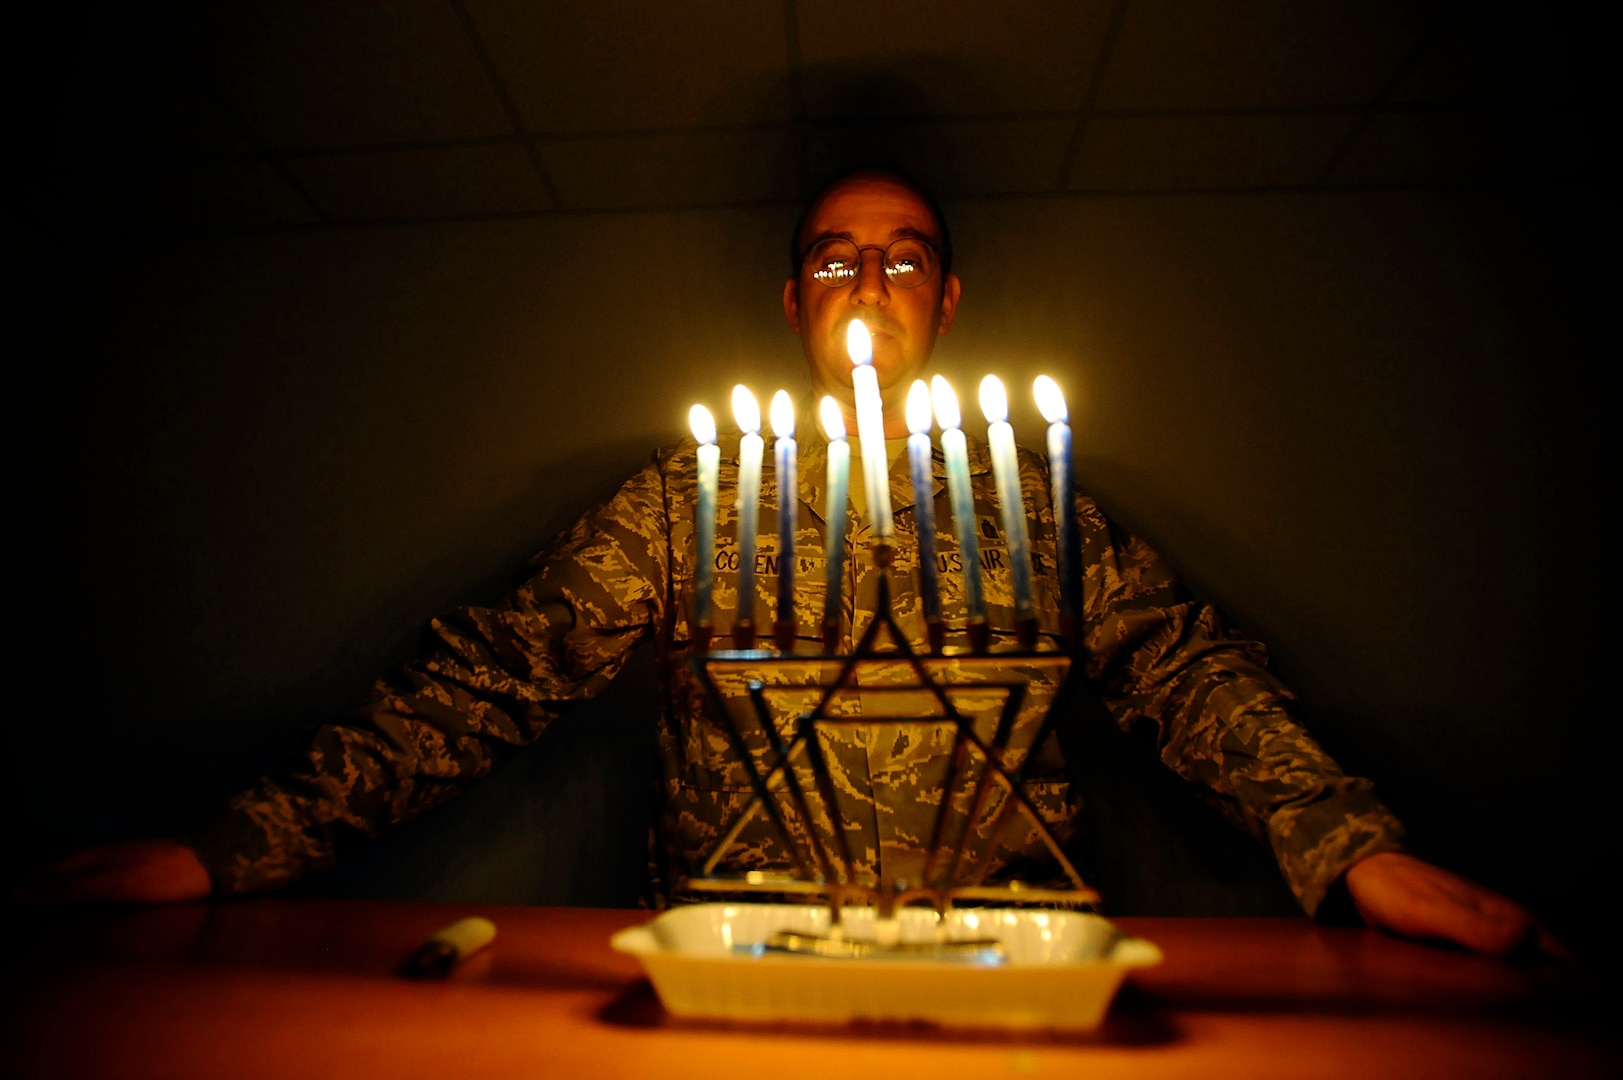 Air Force Capt. Andrew Cohen, chaplain, stands behind a lit menorah during the eighth night of Hanukkah at Joint Base Balad, Iraq. Jewish military chaplains receive a full range of religious supplies from DLA